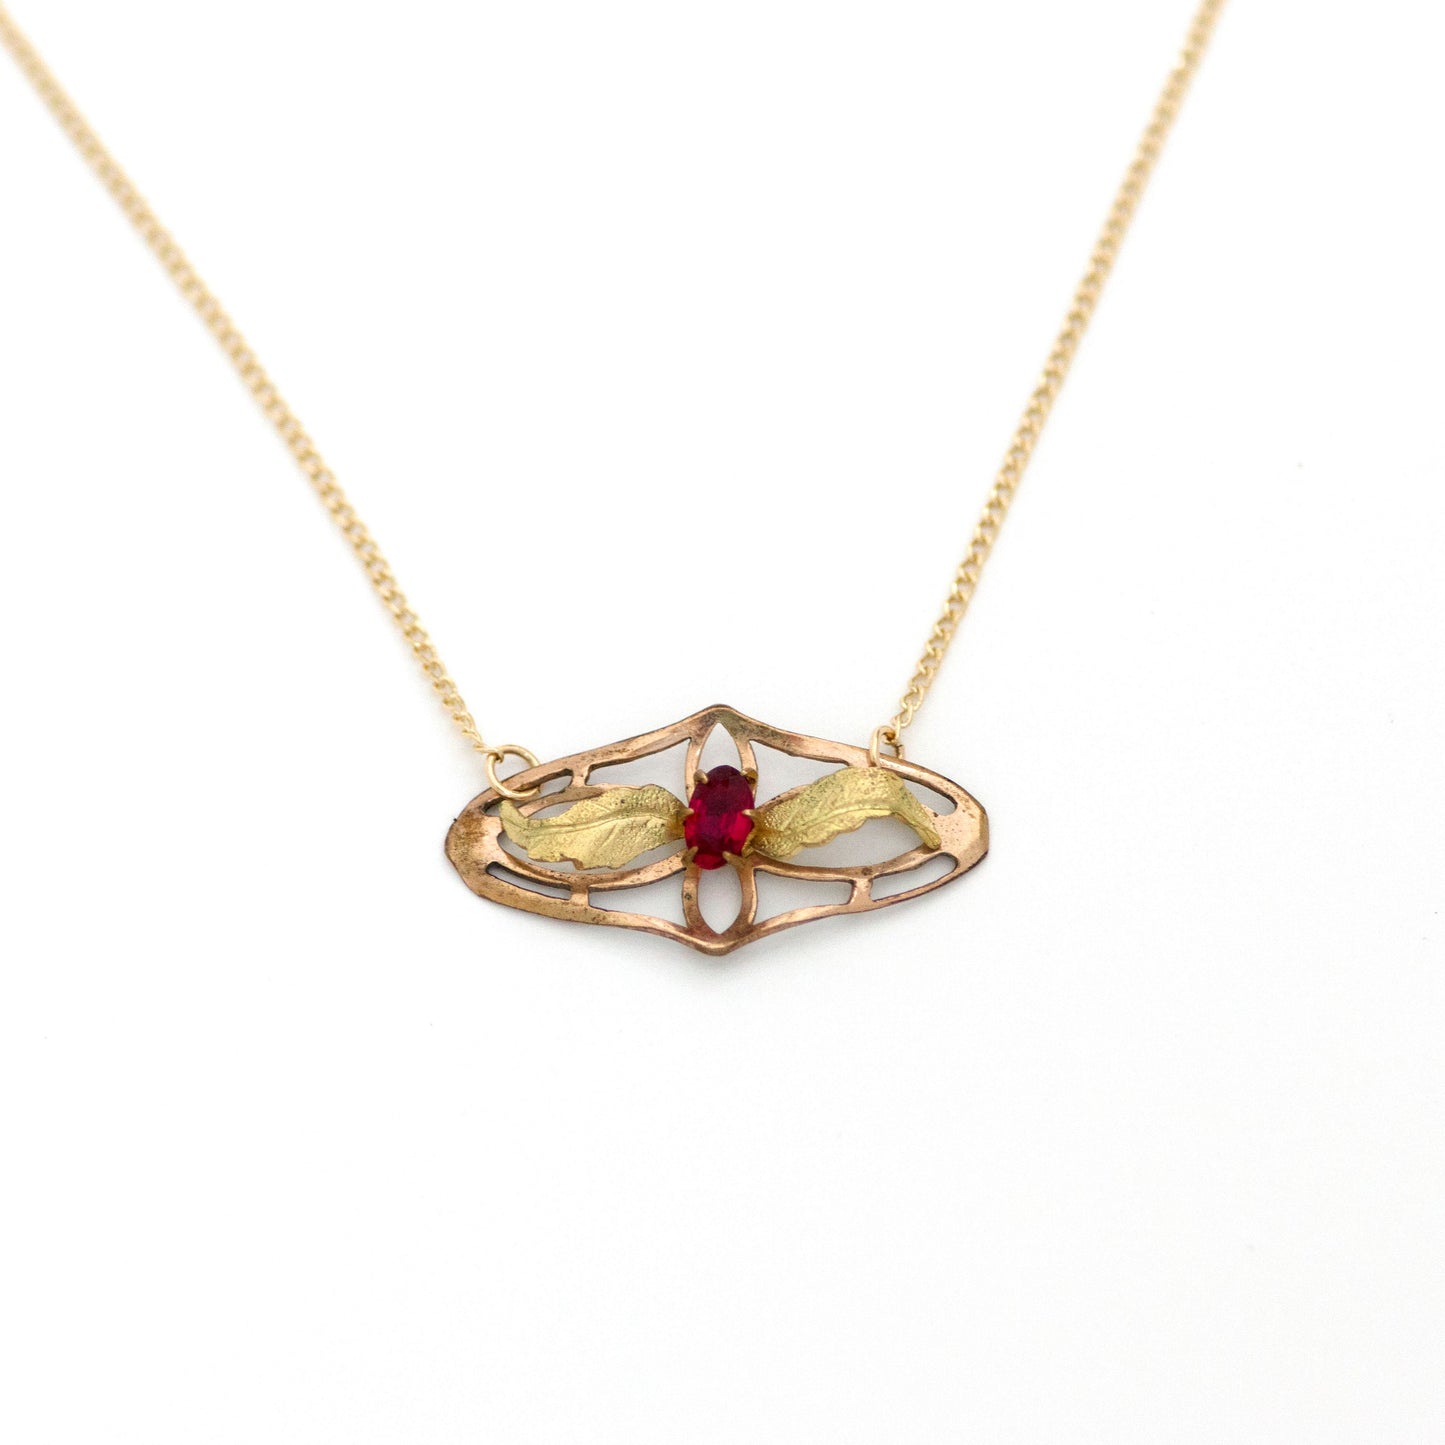 Delicate Leaves Necklace with Red Paste Stone